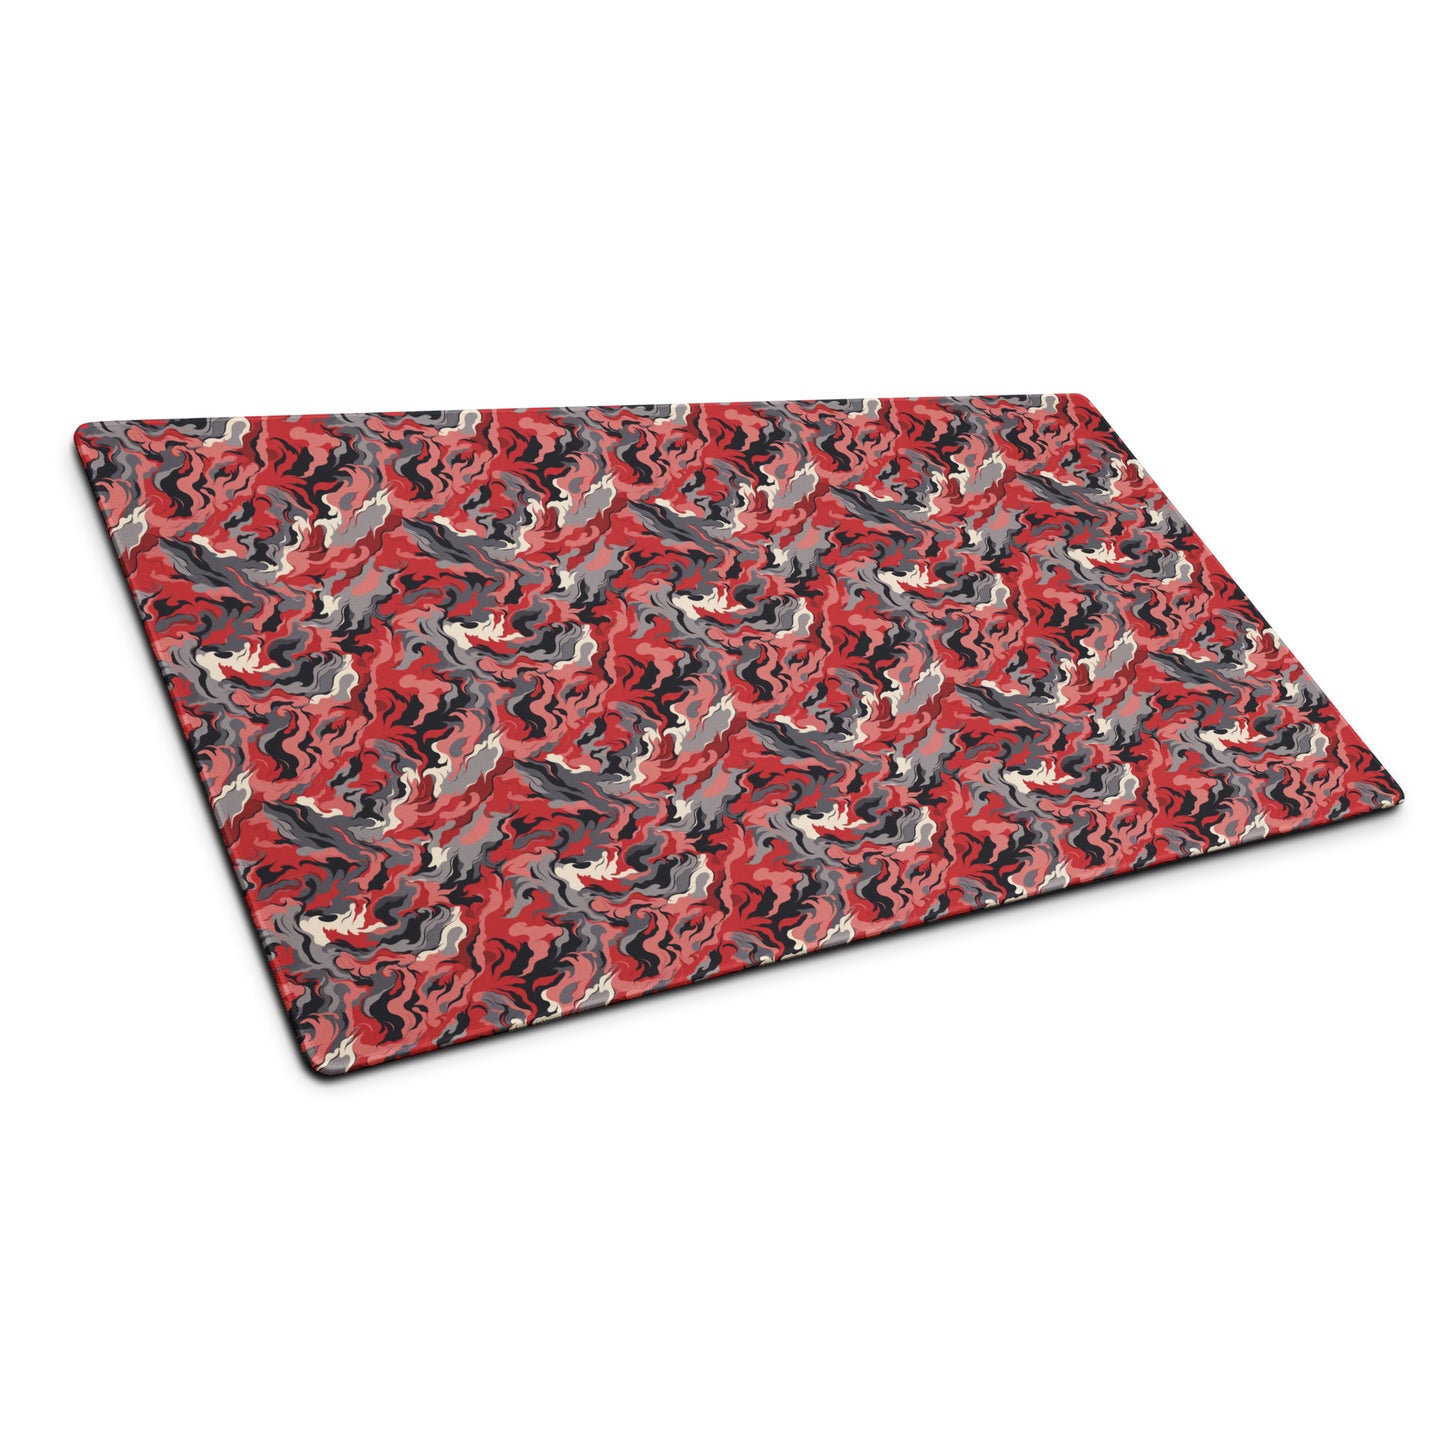 A 36" x 18" desk pad with a grey and red camo pattern sitting at an angle.